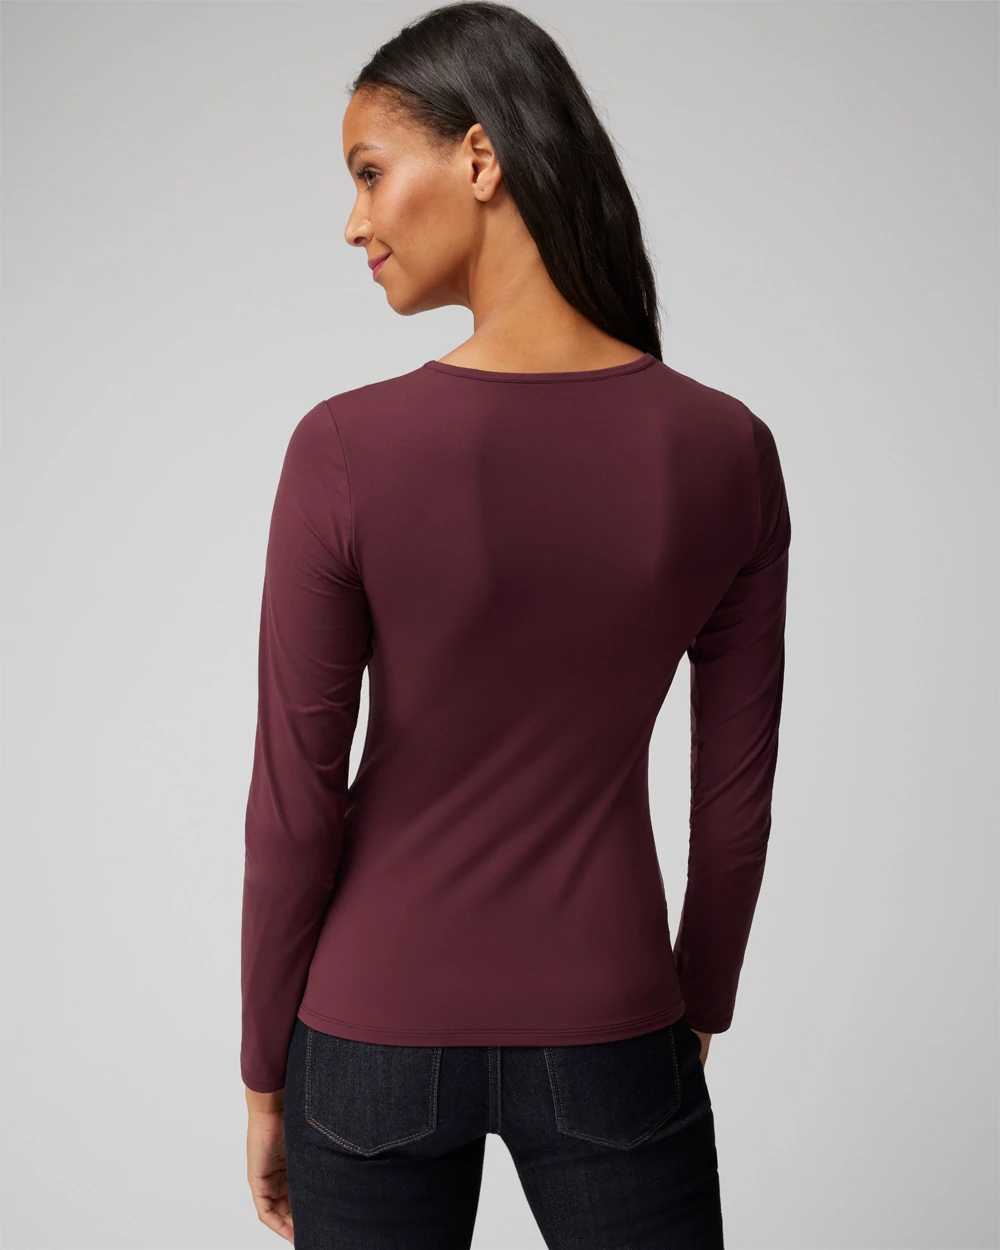 WHBM® FORME Long Sleeve Mesh Top click to view larger image.